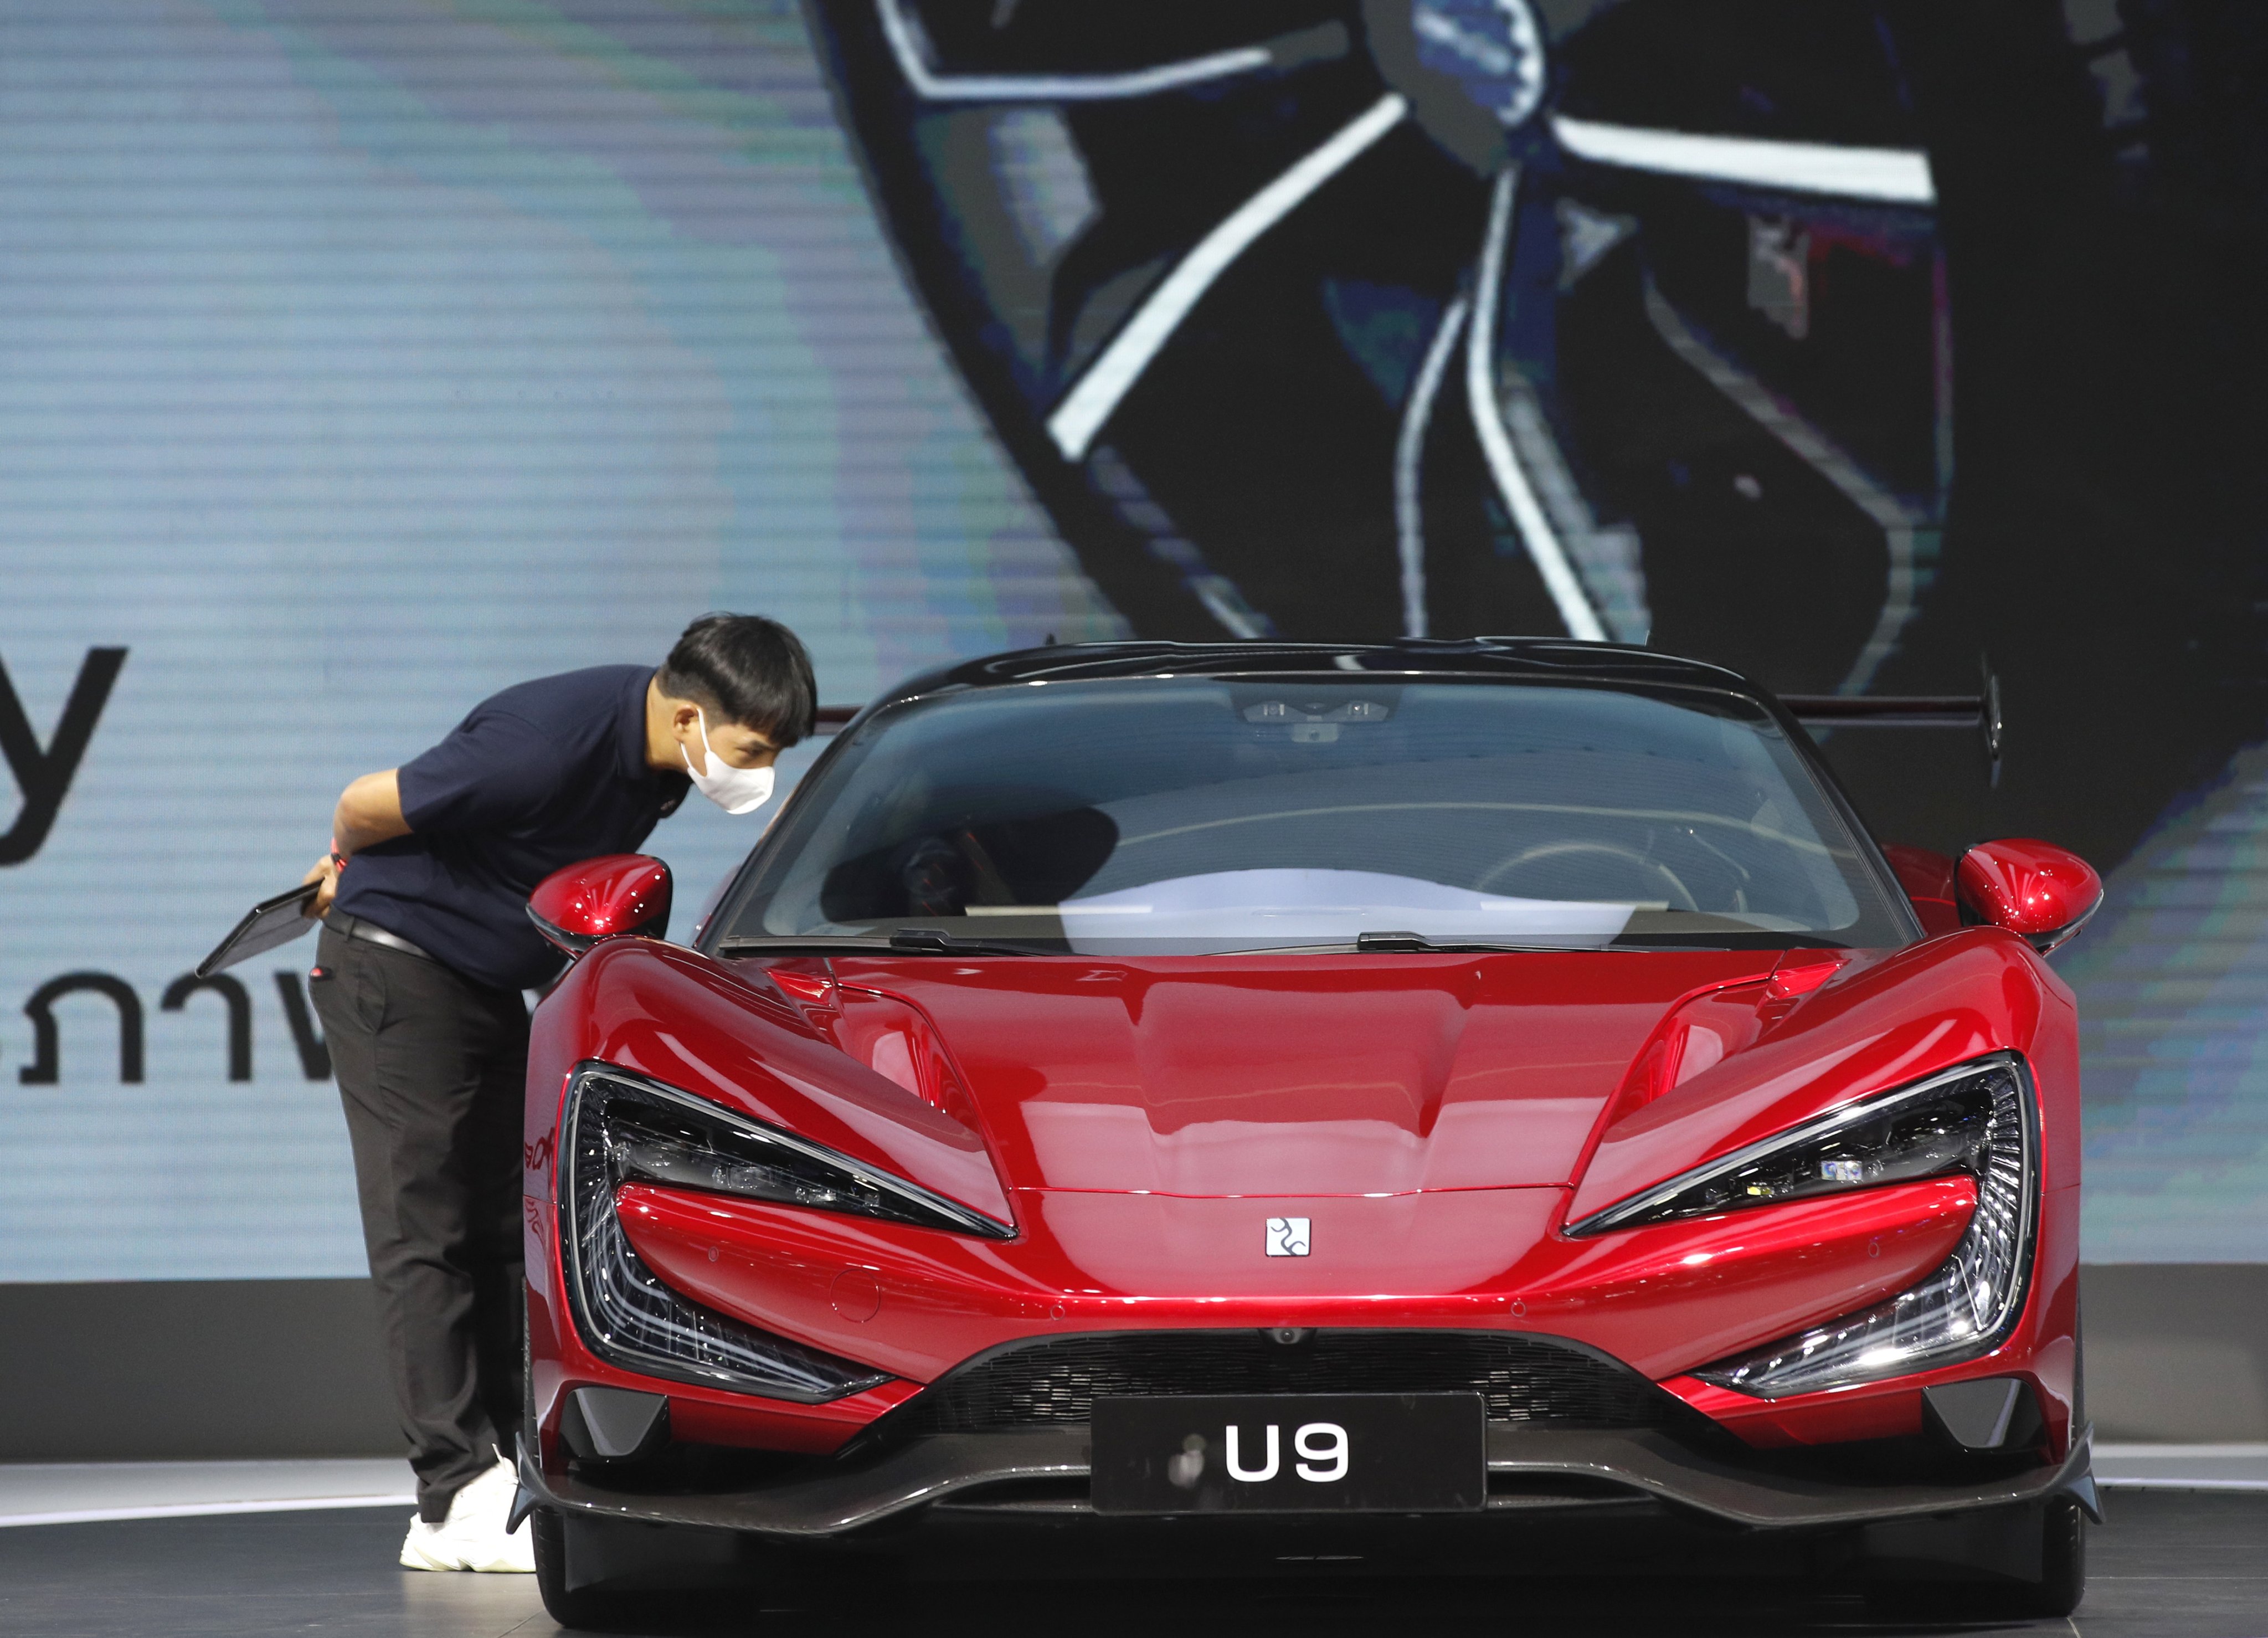 BYD’s YangWang U9 electric supercar is displayed at the 45th Bangkok International Motor Show 2024 in this file photo from March. In the first two months of this year, BYD delivered 325,706 cars to customers, an increase of 2.9 per cent from the same period in 2023. Photo: EPA-EFE